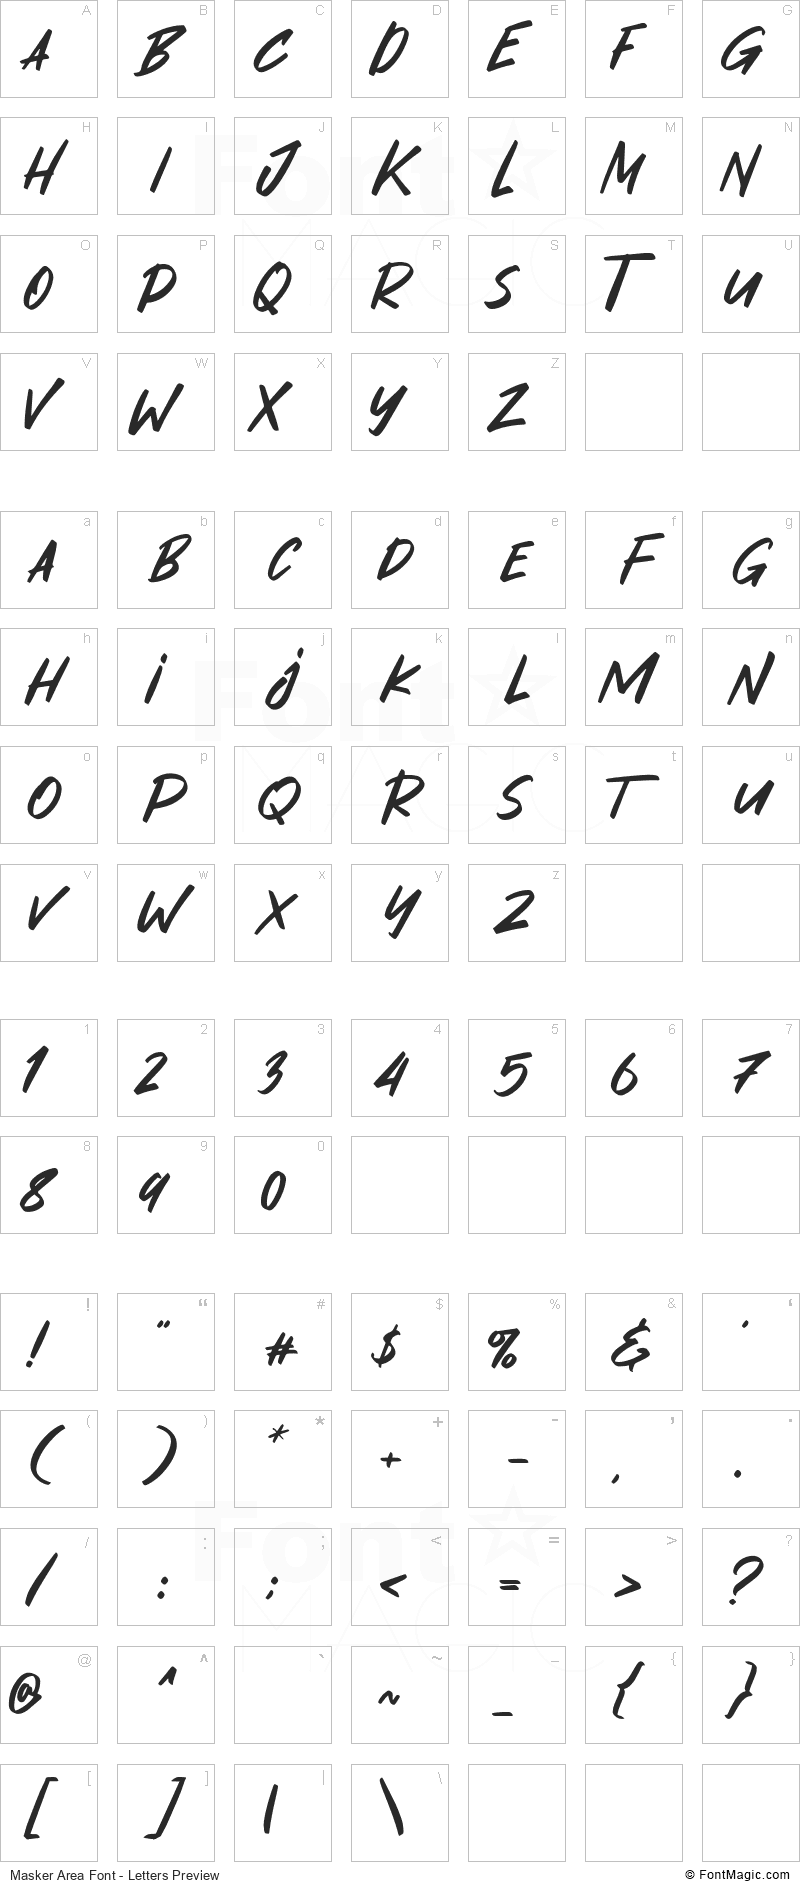 Masker Area Font - All Latters Preview Chart